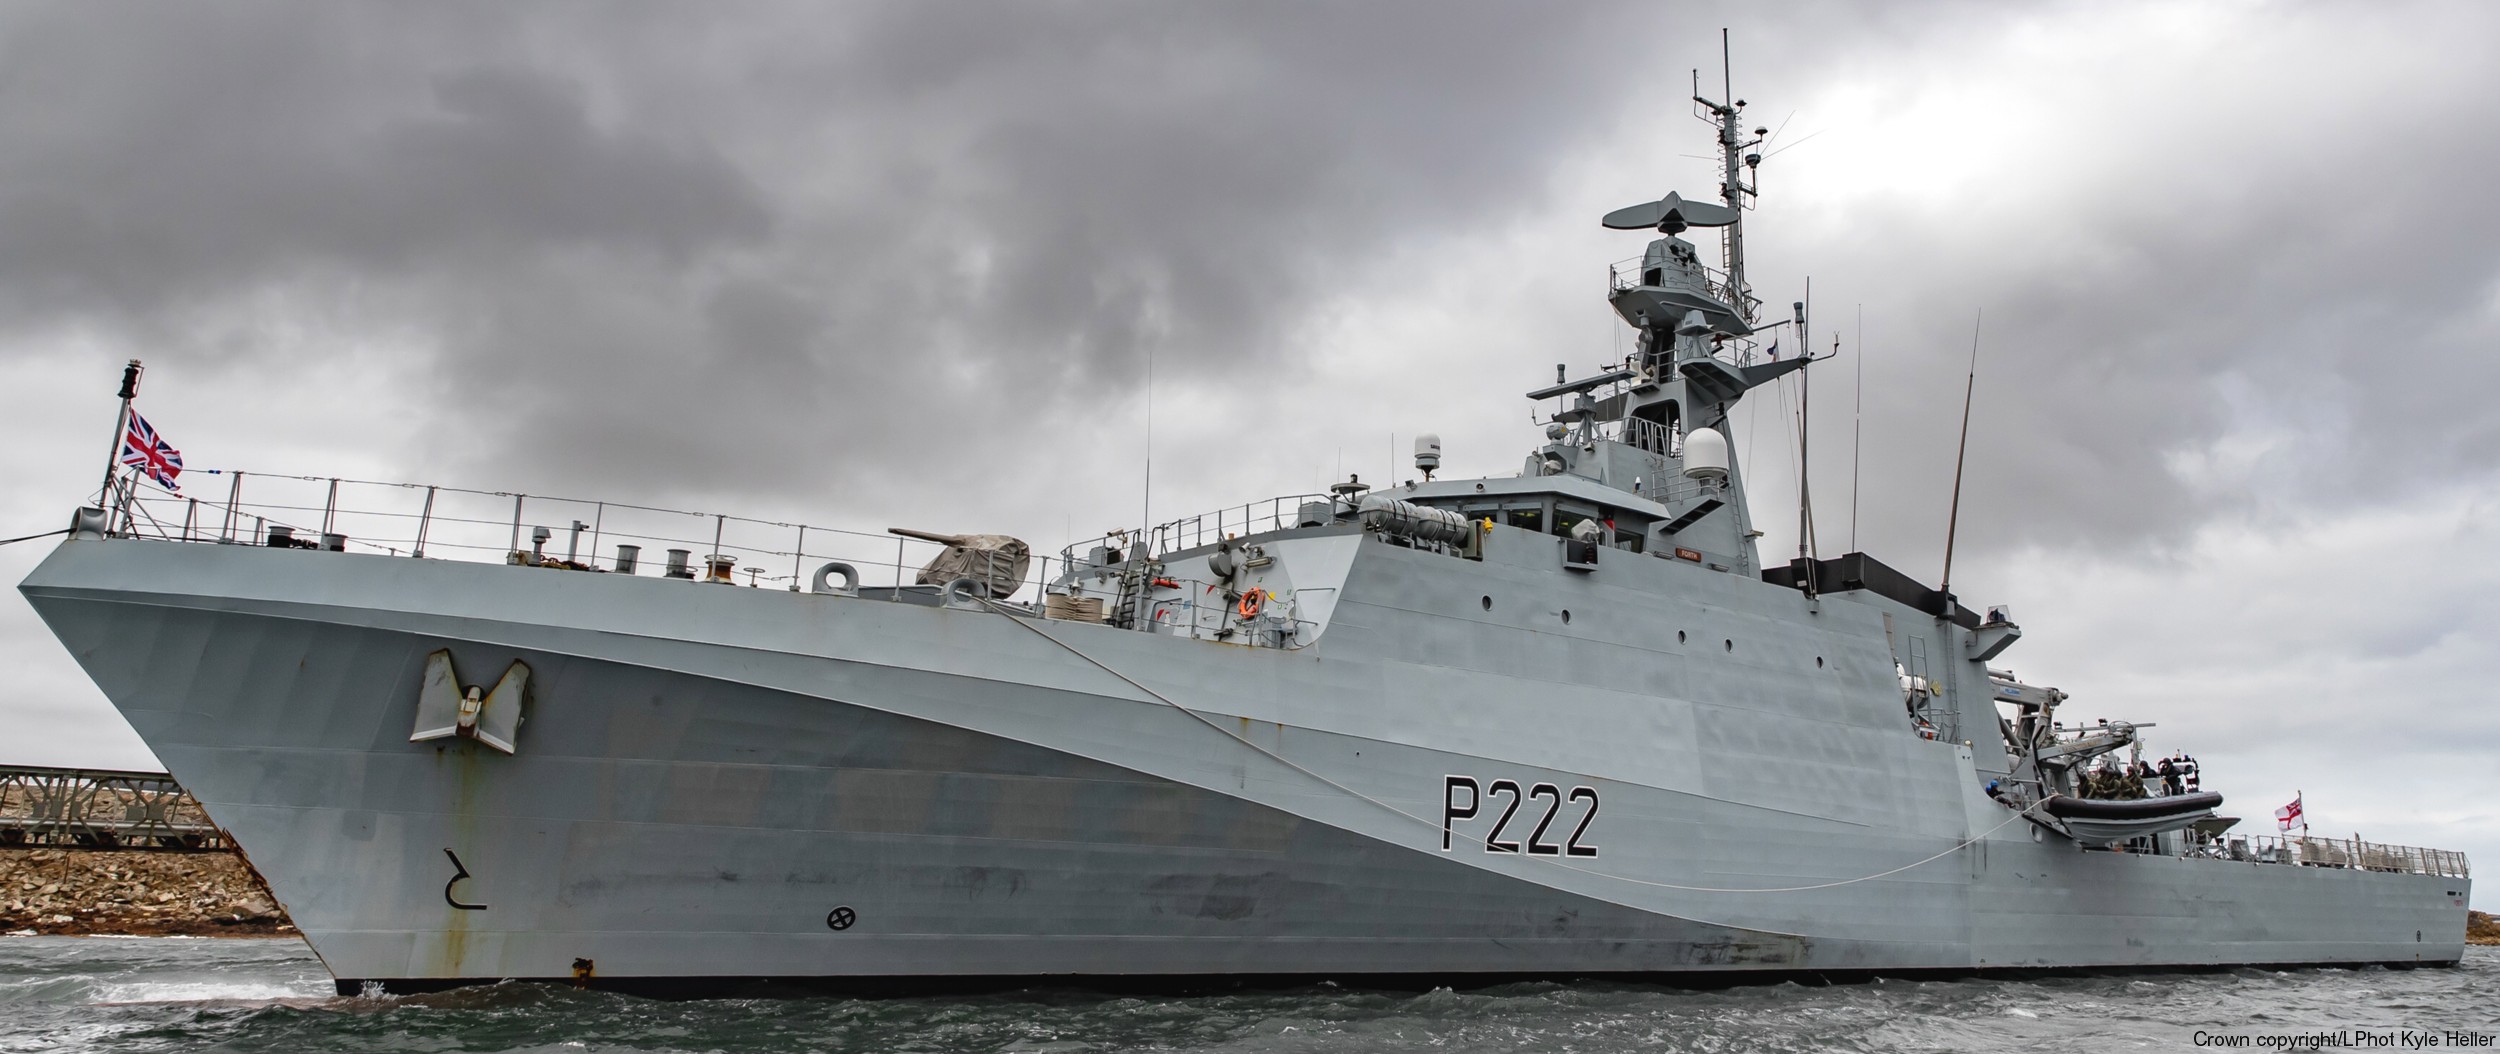 p222 hms forth river class offshore patrol vessel opv royal navy 38